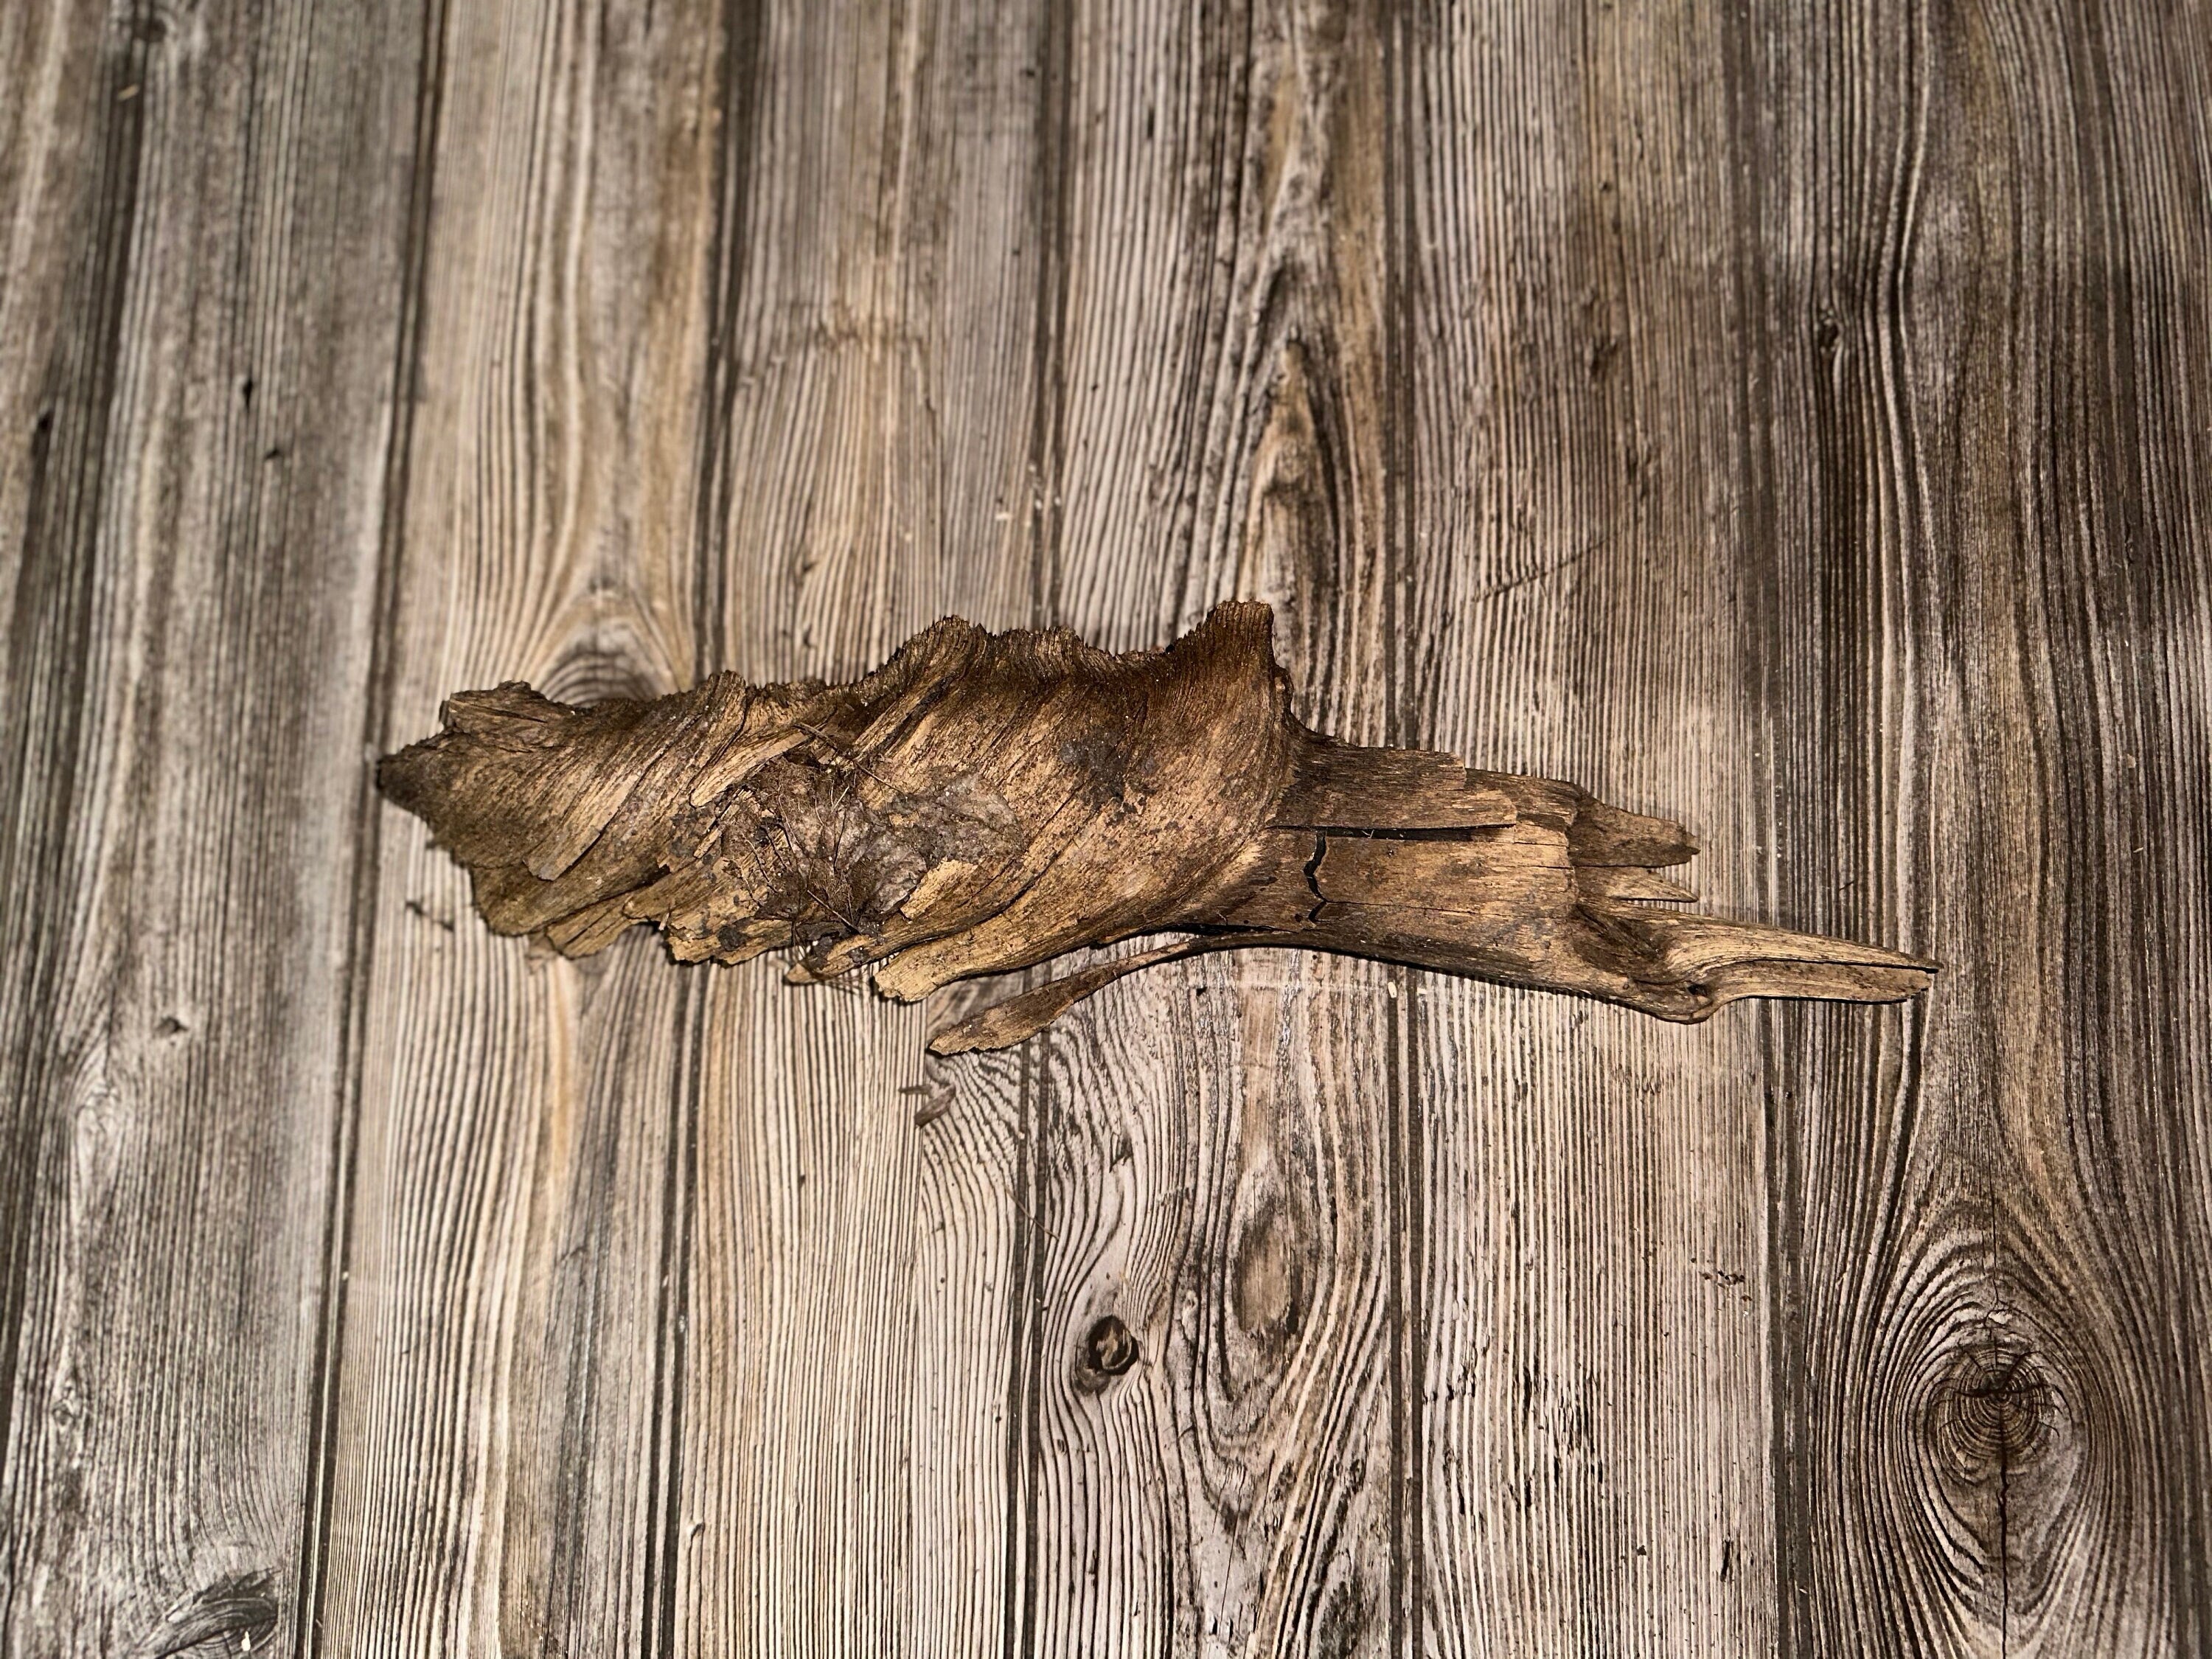 Wood Spearhead, Spearhead Shaped Driftwood, Bark, 16.5 Inches Long by 3.5 Inches Wide and 2.5 Inches High